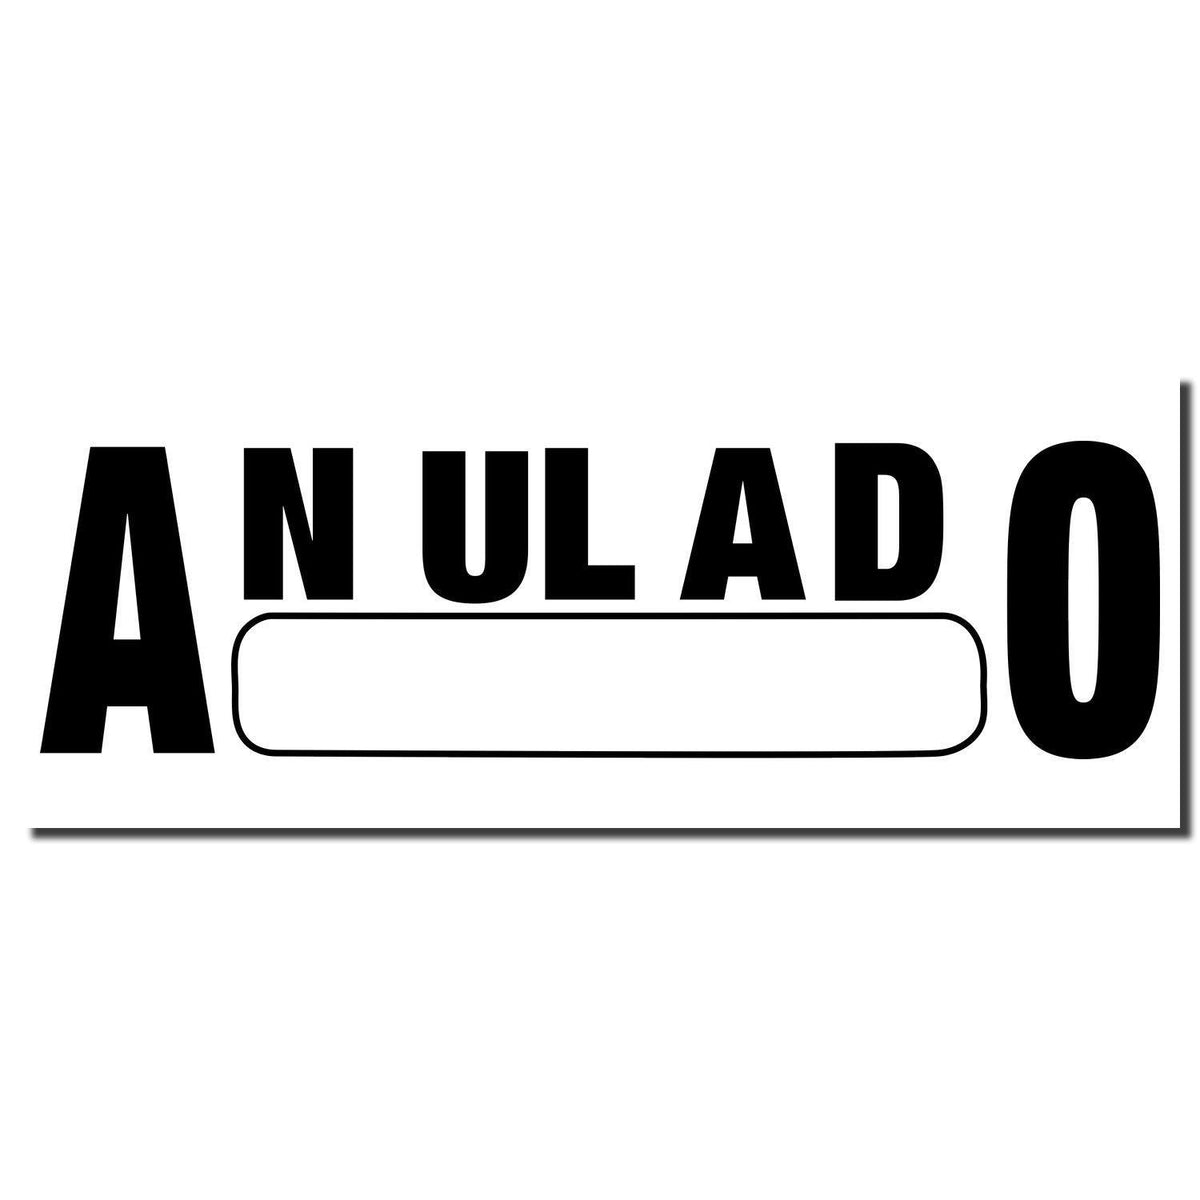 Self-Inking Anulado Stamp - Engineer Seal Stamps - Brand_Trodat, Impression Size_Small, Stamp Type_Self-Inking Stamp, Type of Use_Finance, Type of Use_Office